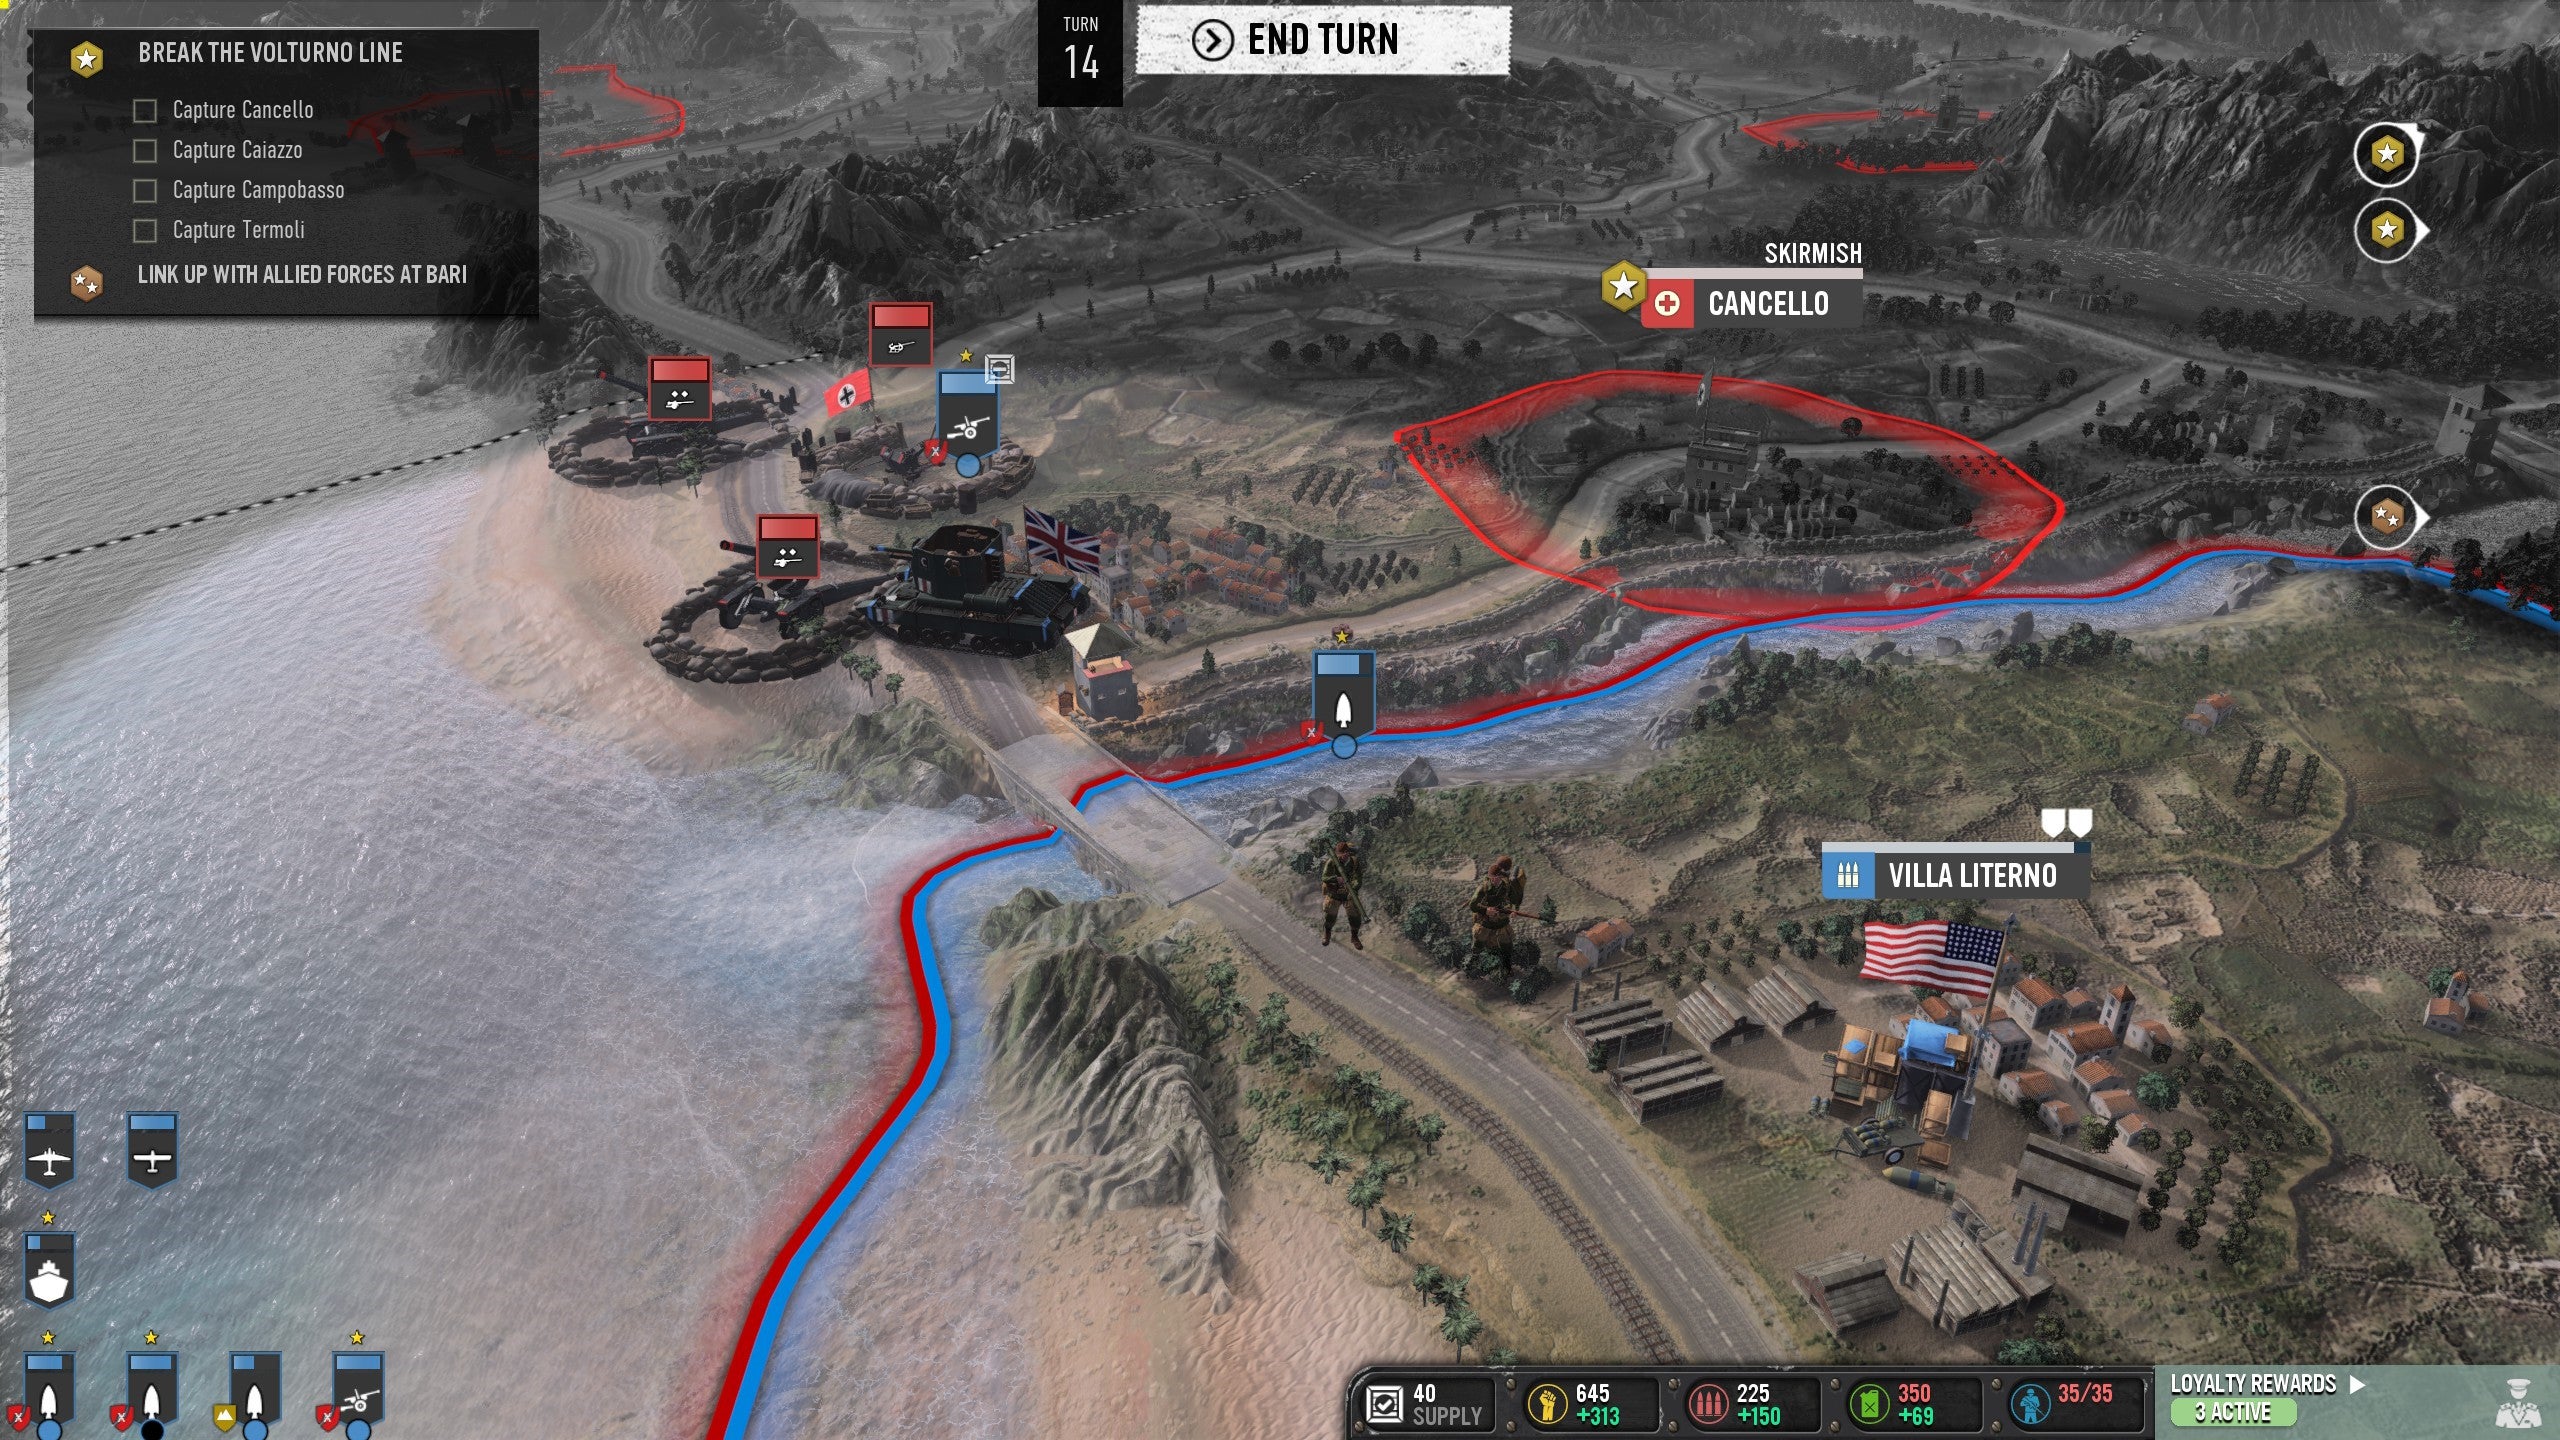 A troop of soldiers and a tank unit approach the Italian town of Cancello in Company Of Heroes 3